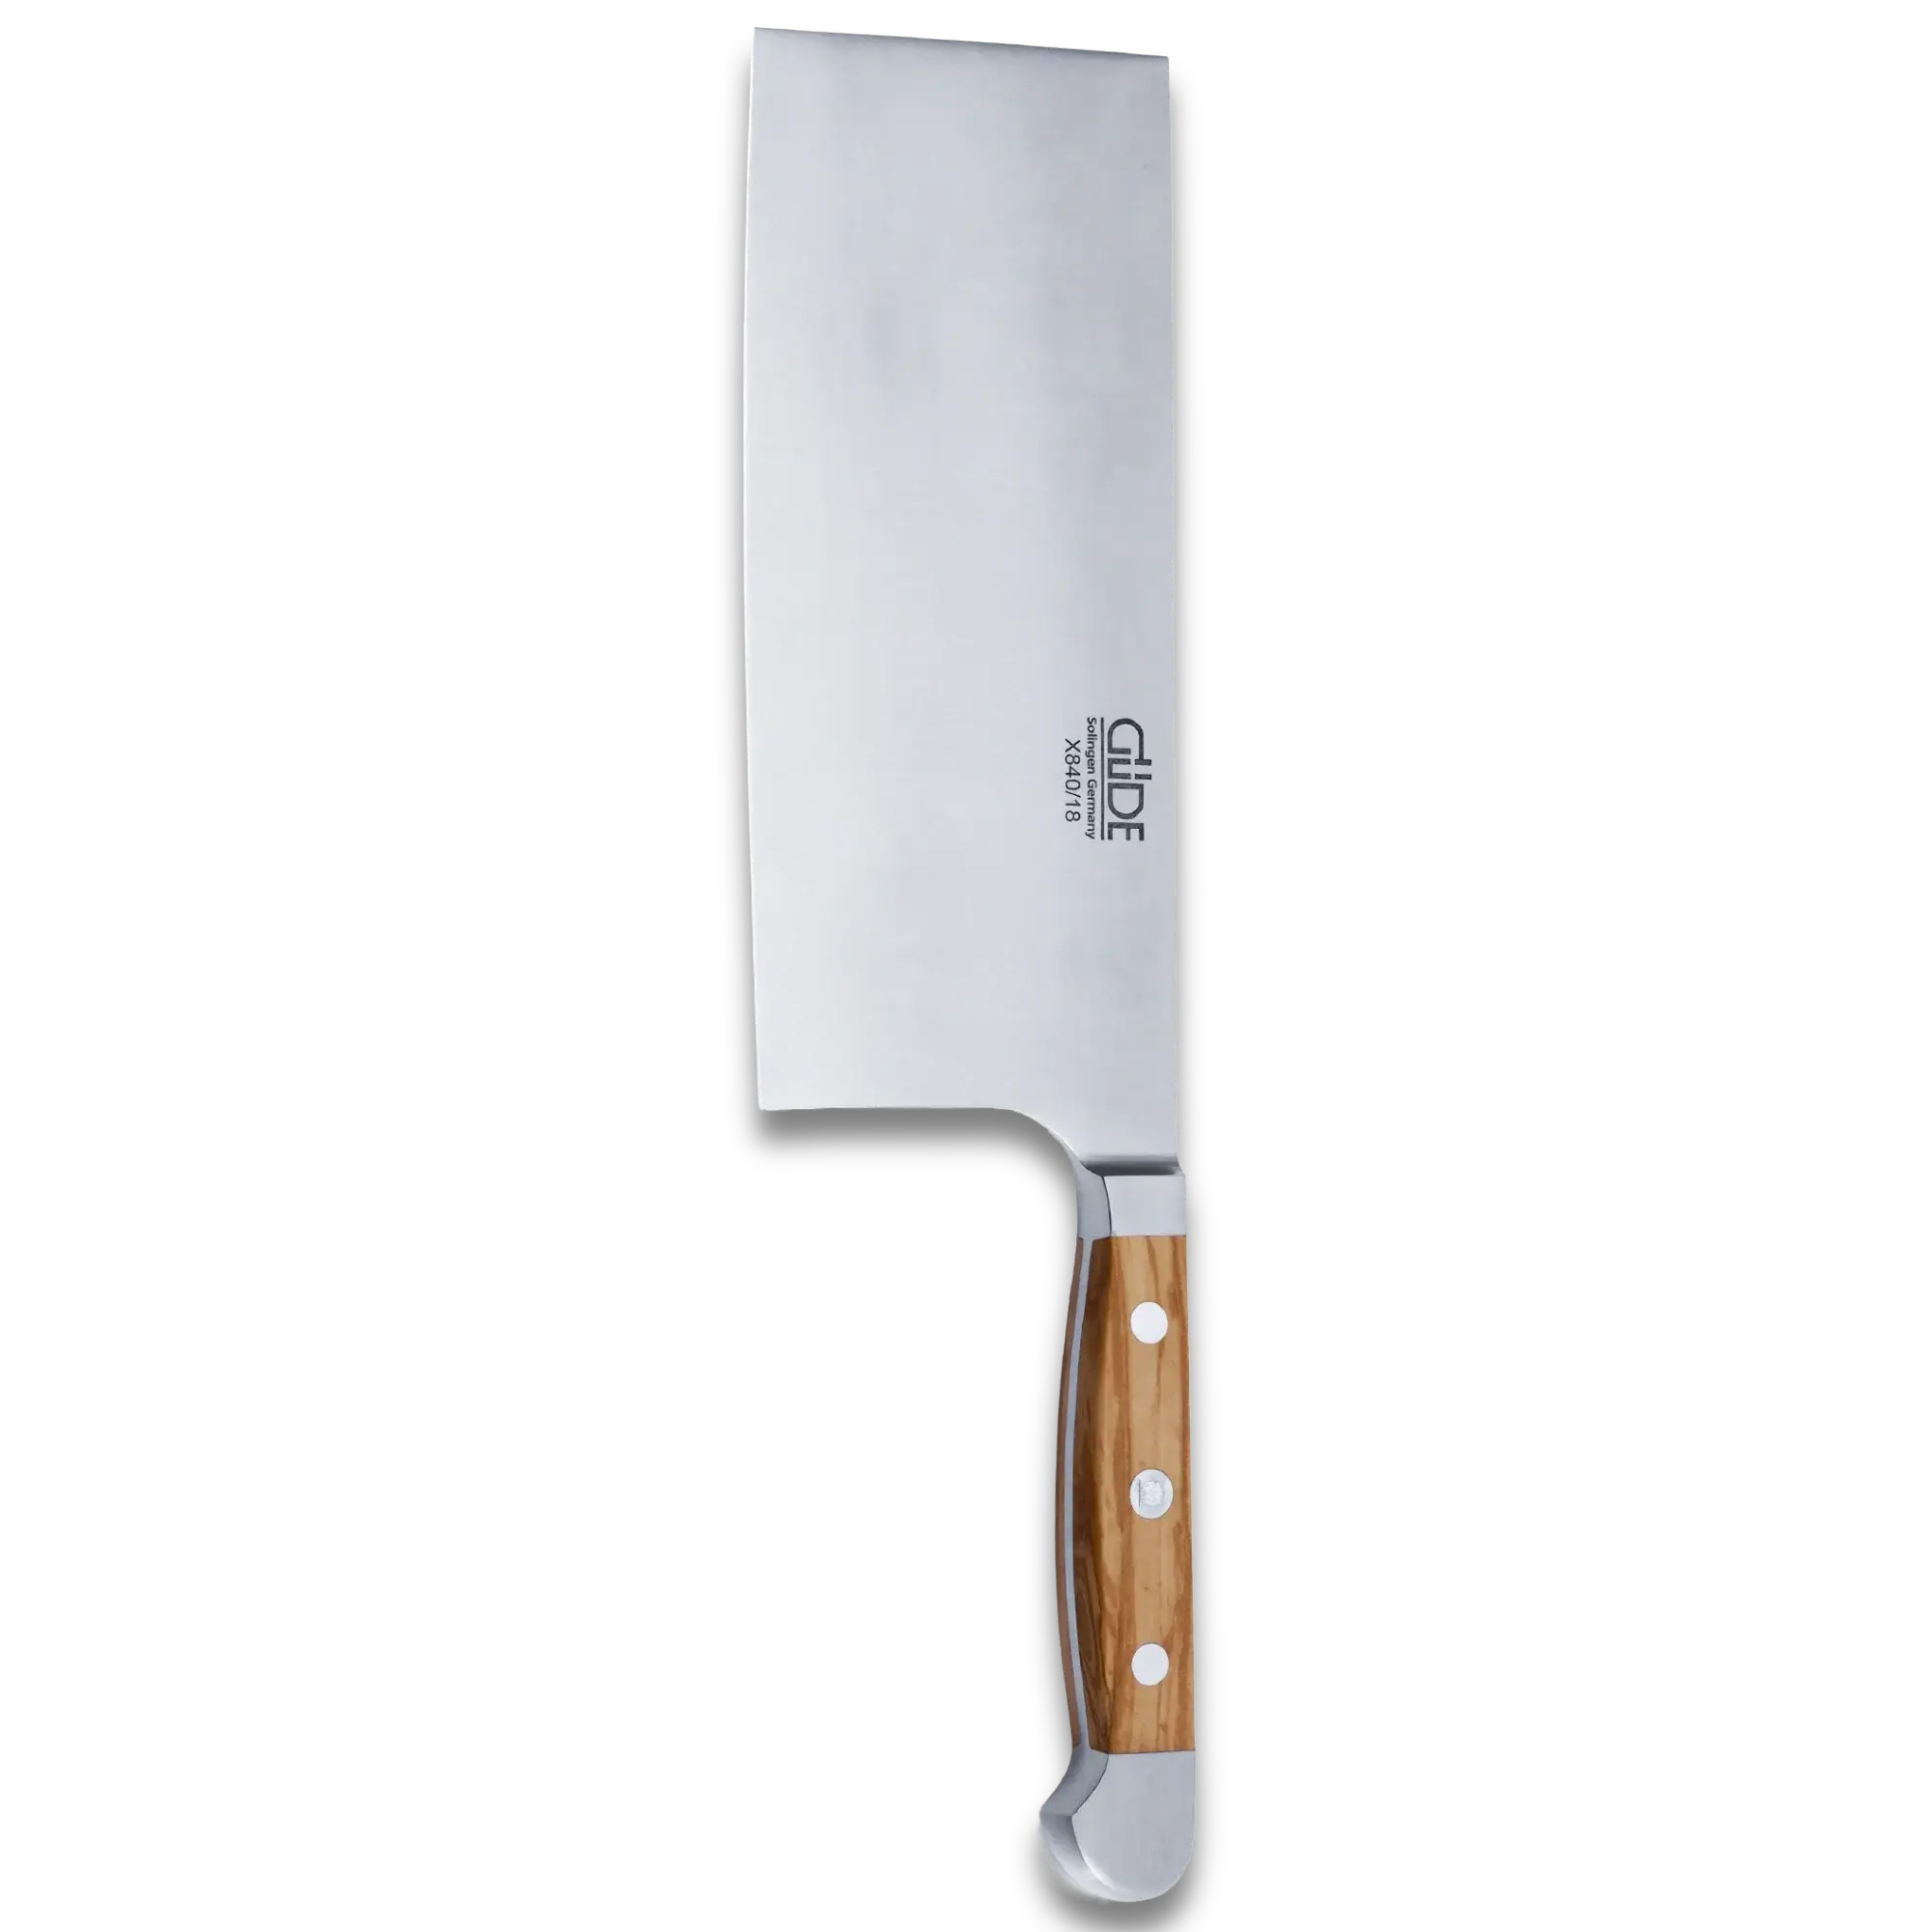 ALPHA OLIVE |  Chinese Chef's Knife 8" blade / Olive Wood handle